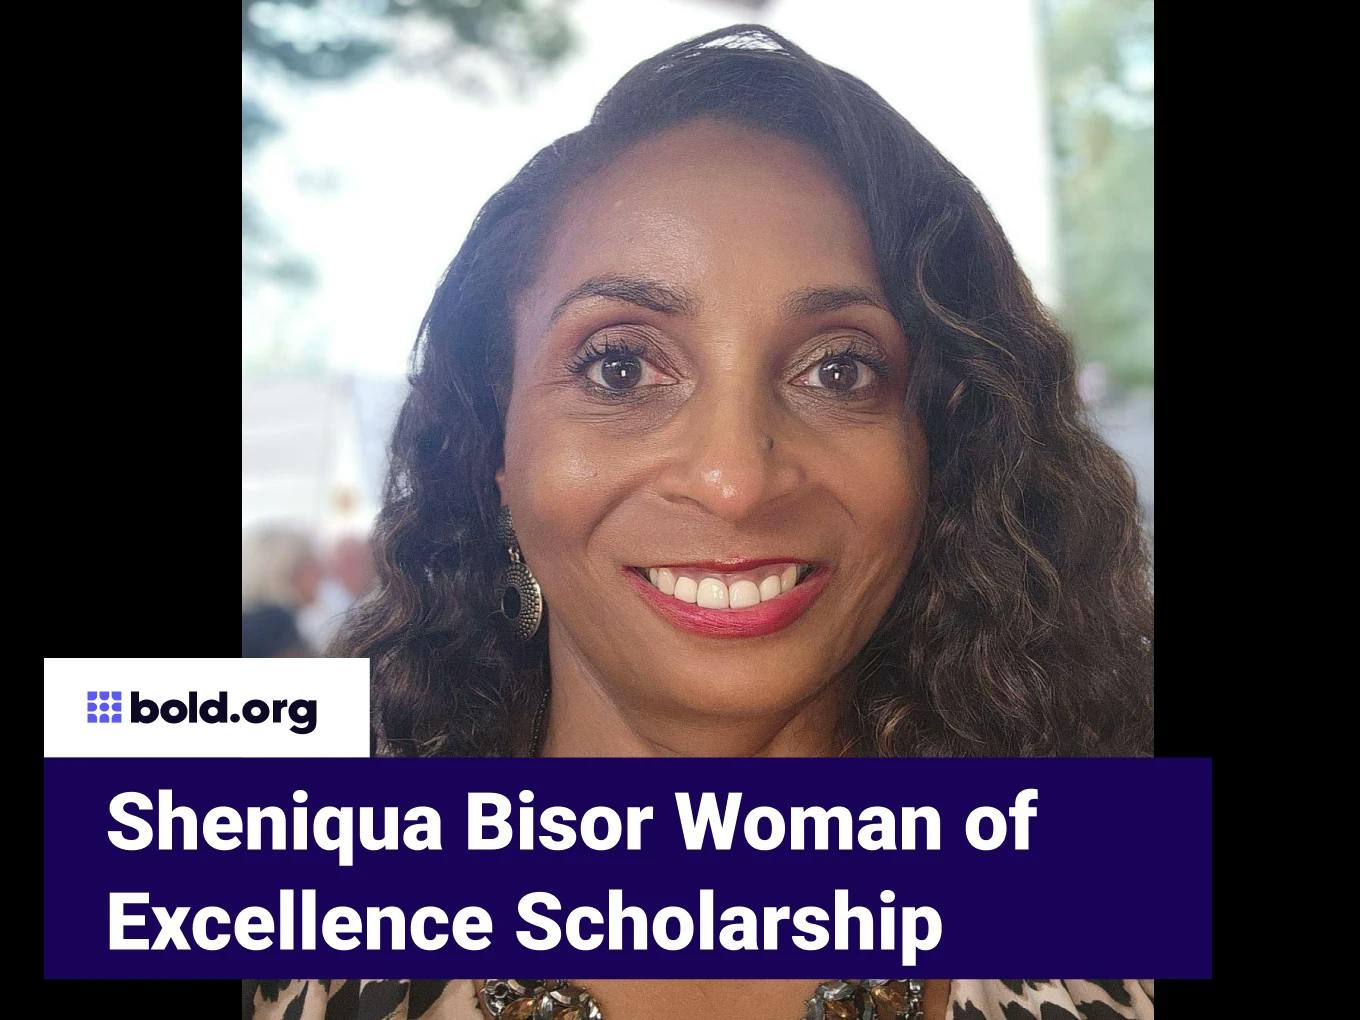 Sheniqua Bisor Woman of Excellence Scholarship